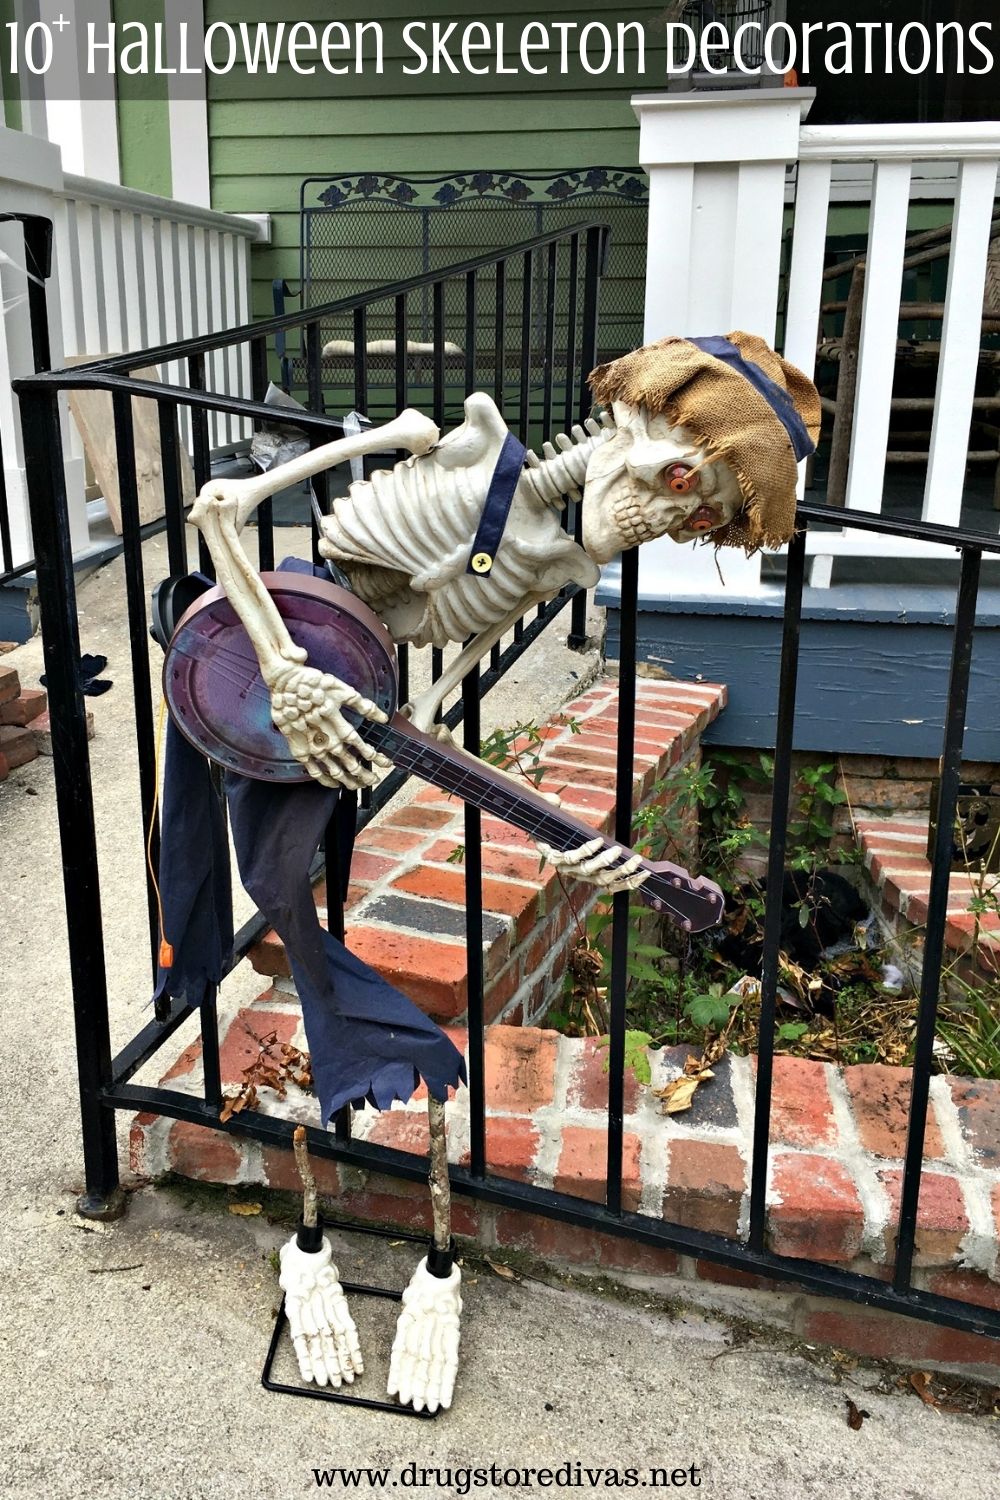 If you're thinking about Halloween decorations, check out this list of 10+ Halloween Skeleton Decorations on www.drugstoredivas.net.